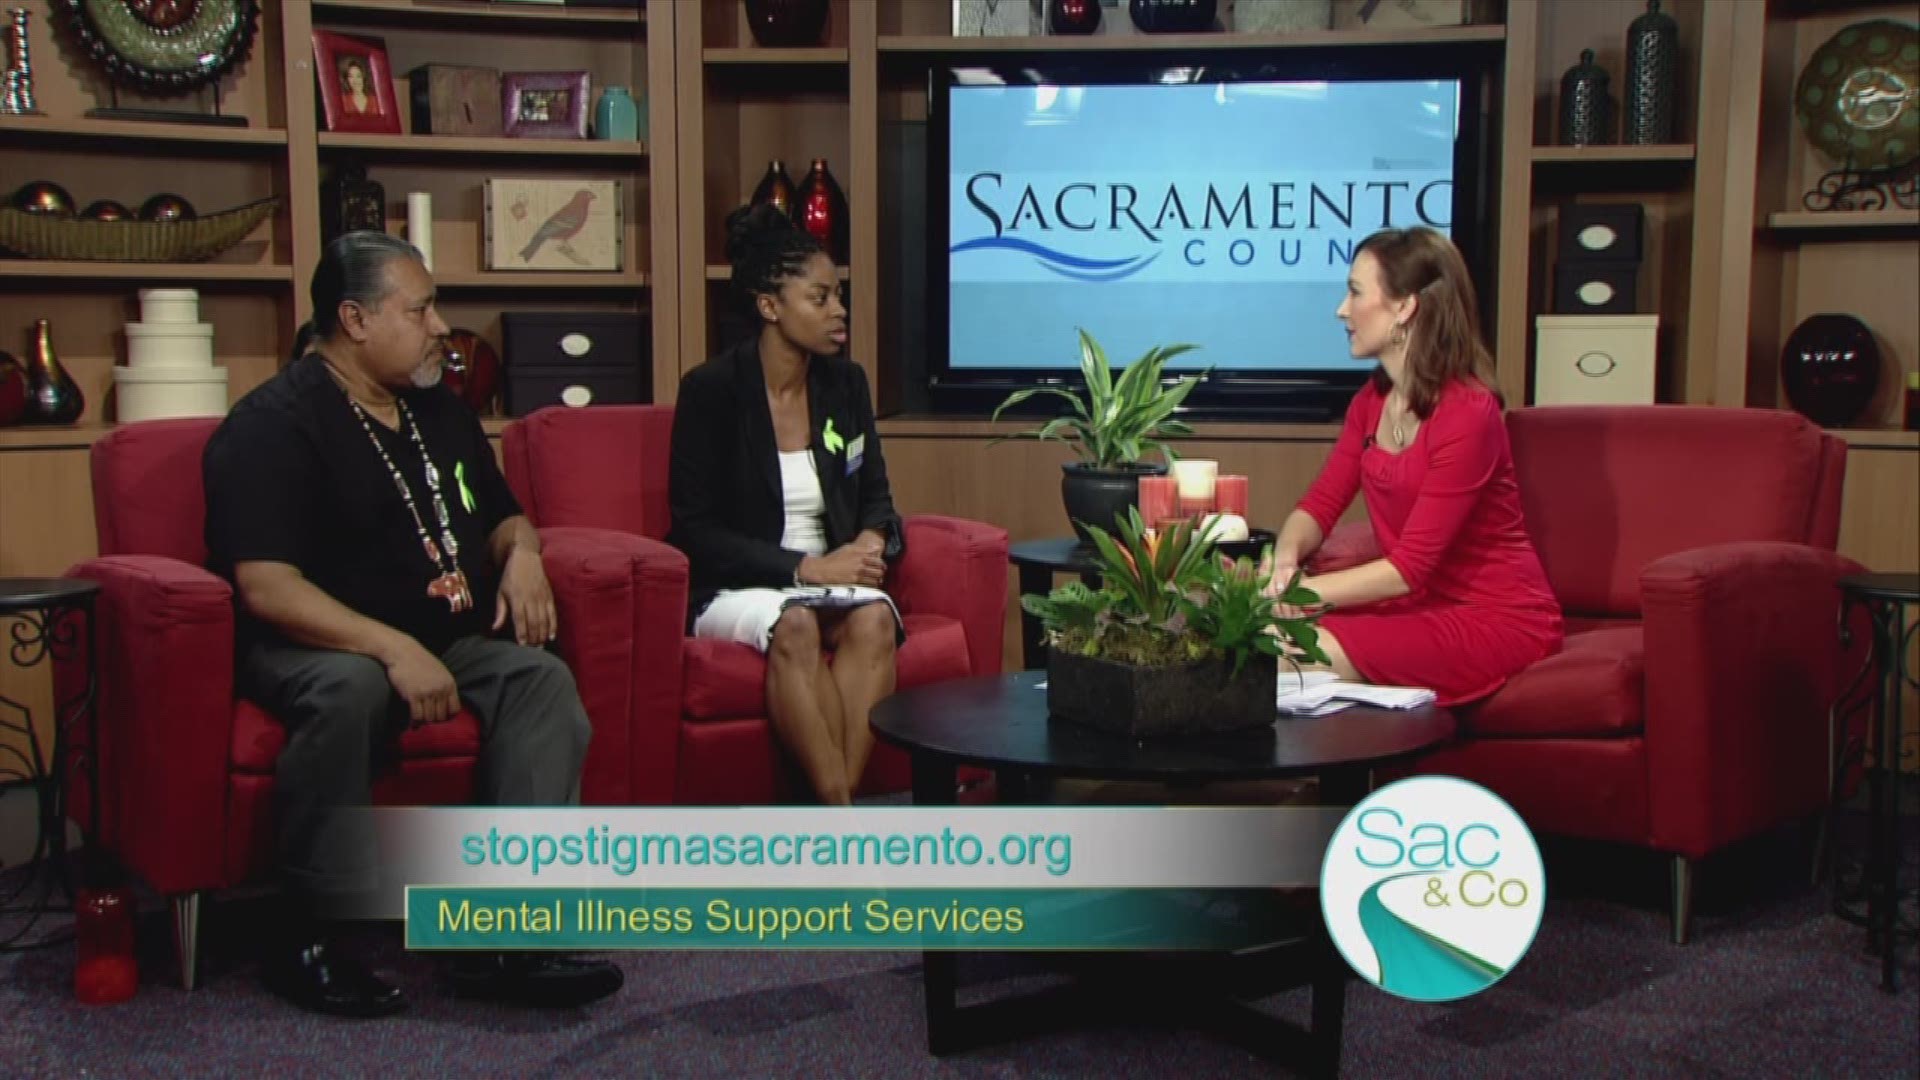 Find out how the Sacramento County is creating awareness about mental illness.